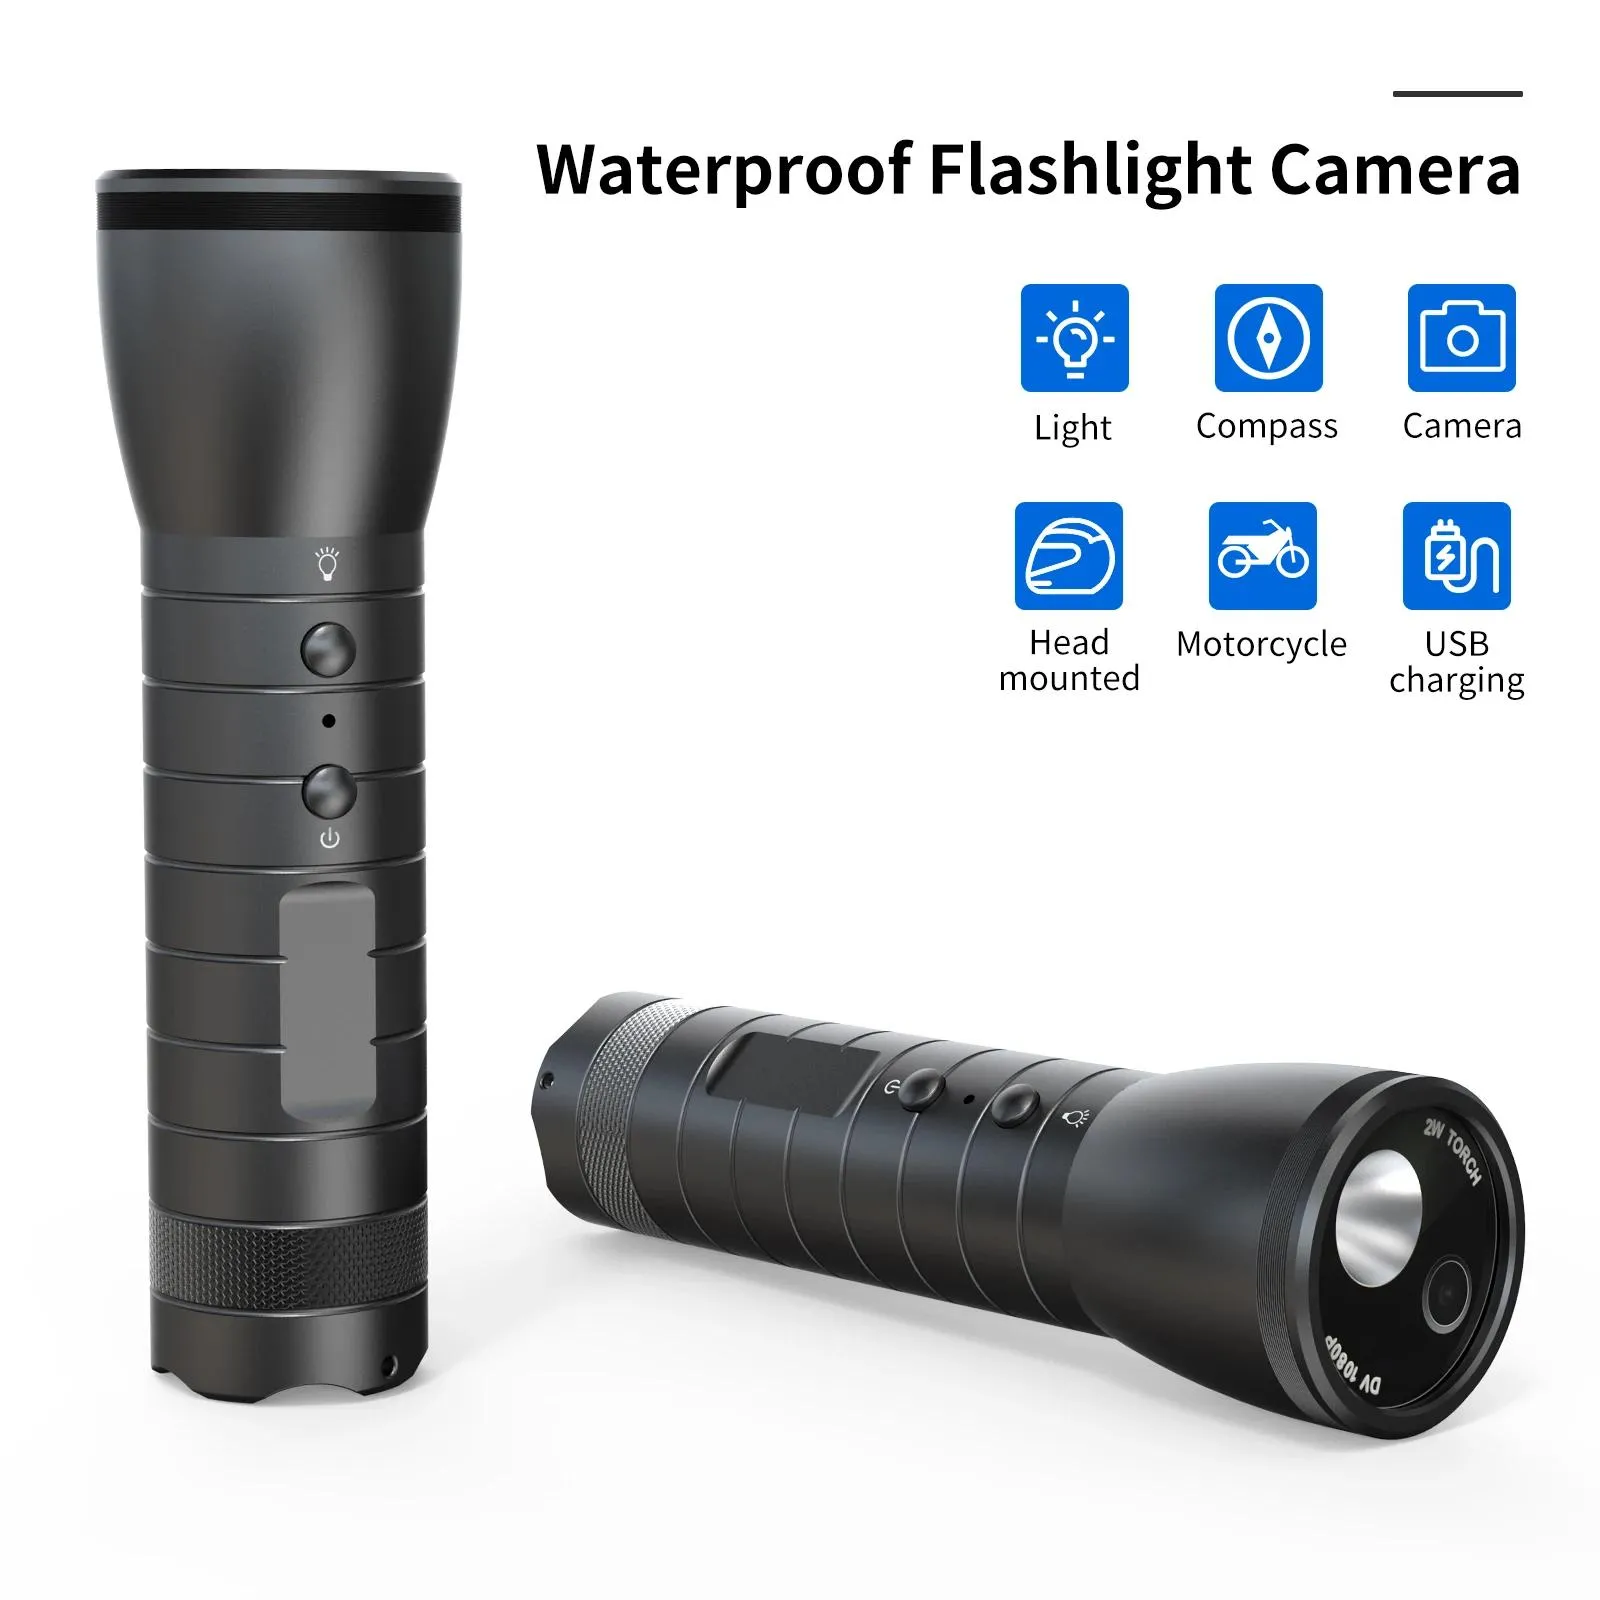 Cameras 2MP 1080p Telephoto 120 Degree Waterproof Sports Action Camera Flashlight Shape DV Video Camcorder for Outdoor Climbing Cycling